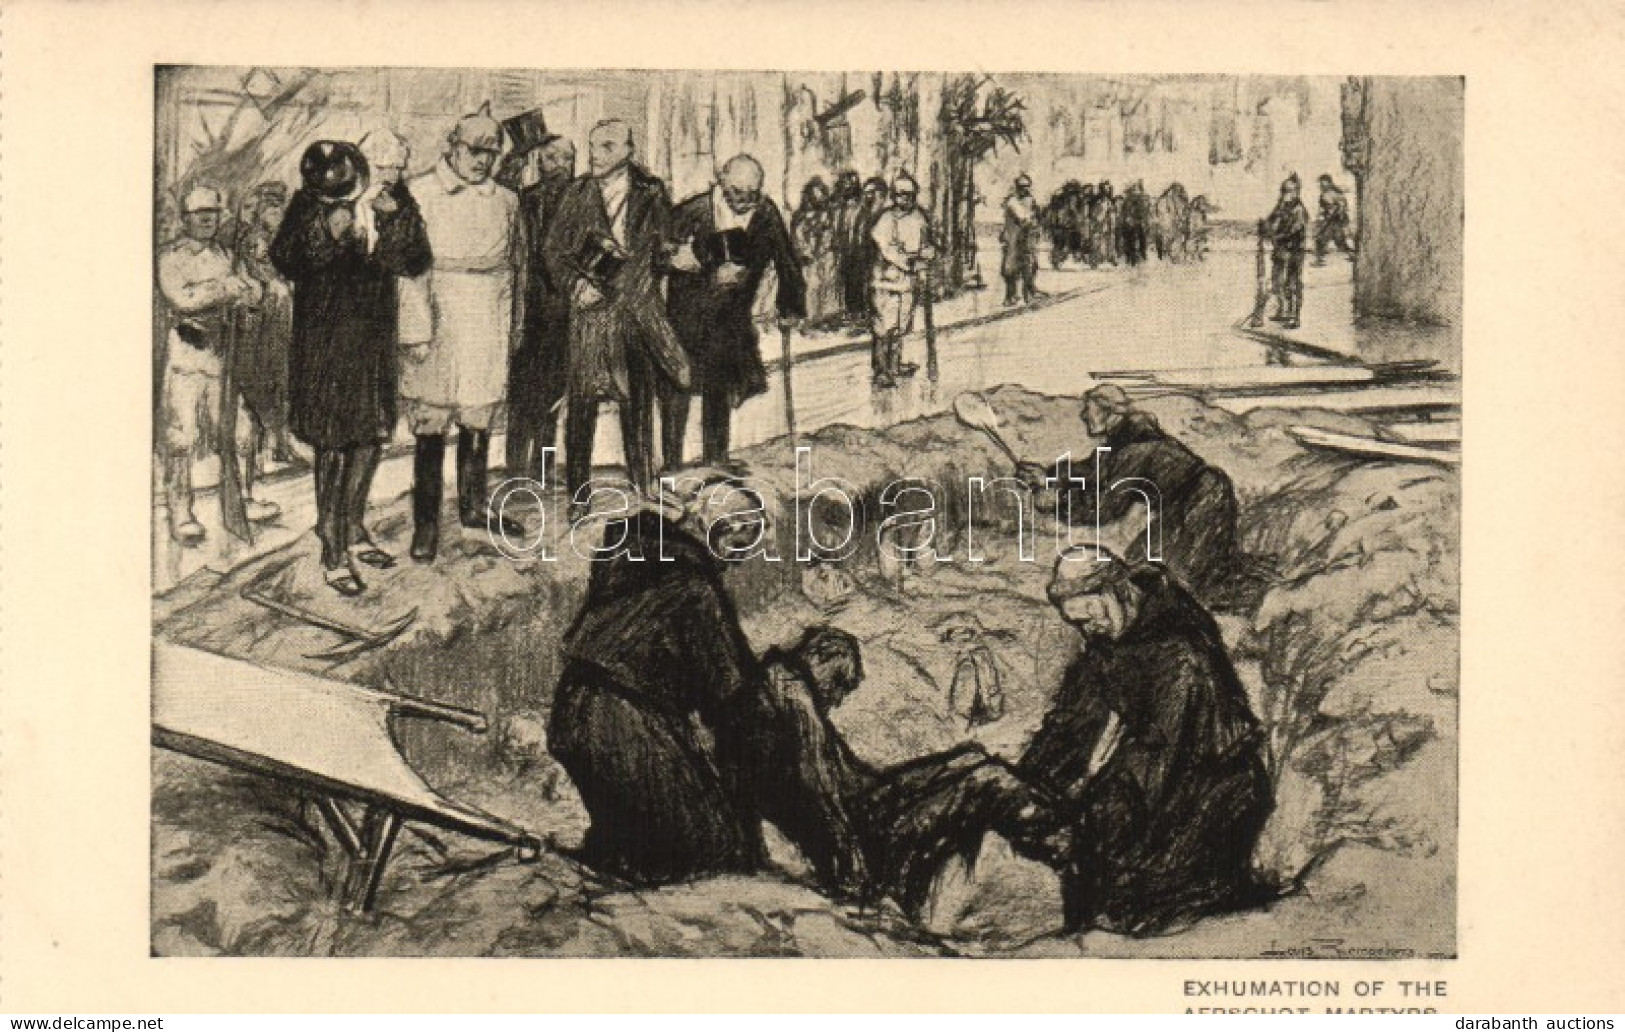 ** T1 Exhumation Of The Aerschot Martyrs; WWI Dutch Political Propaganda S: Raemaekers - Unclassified